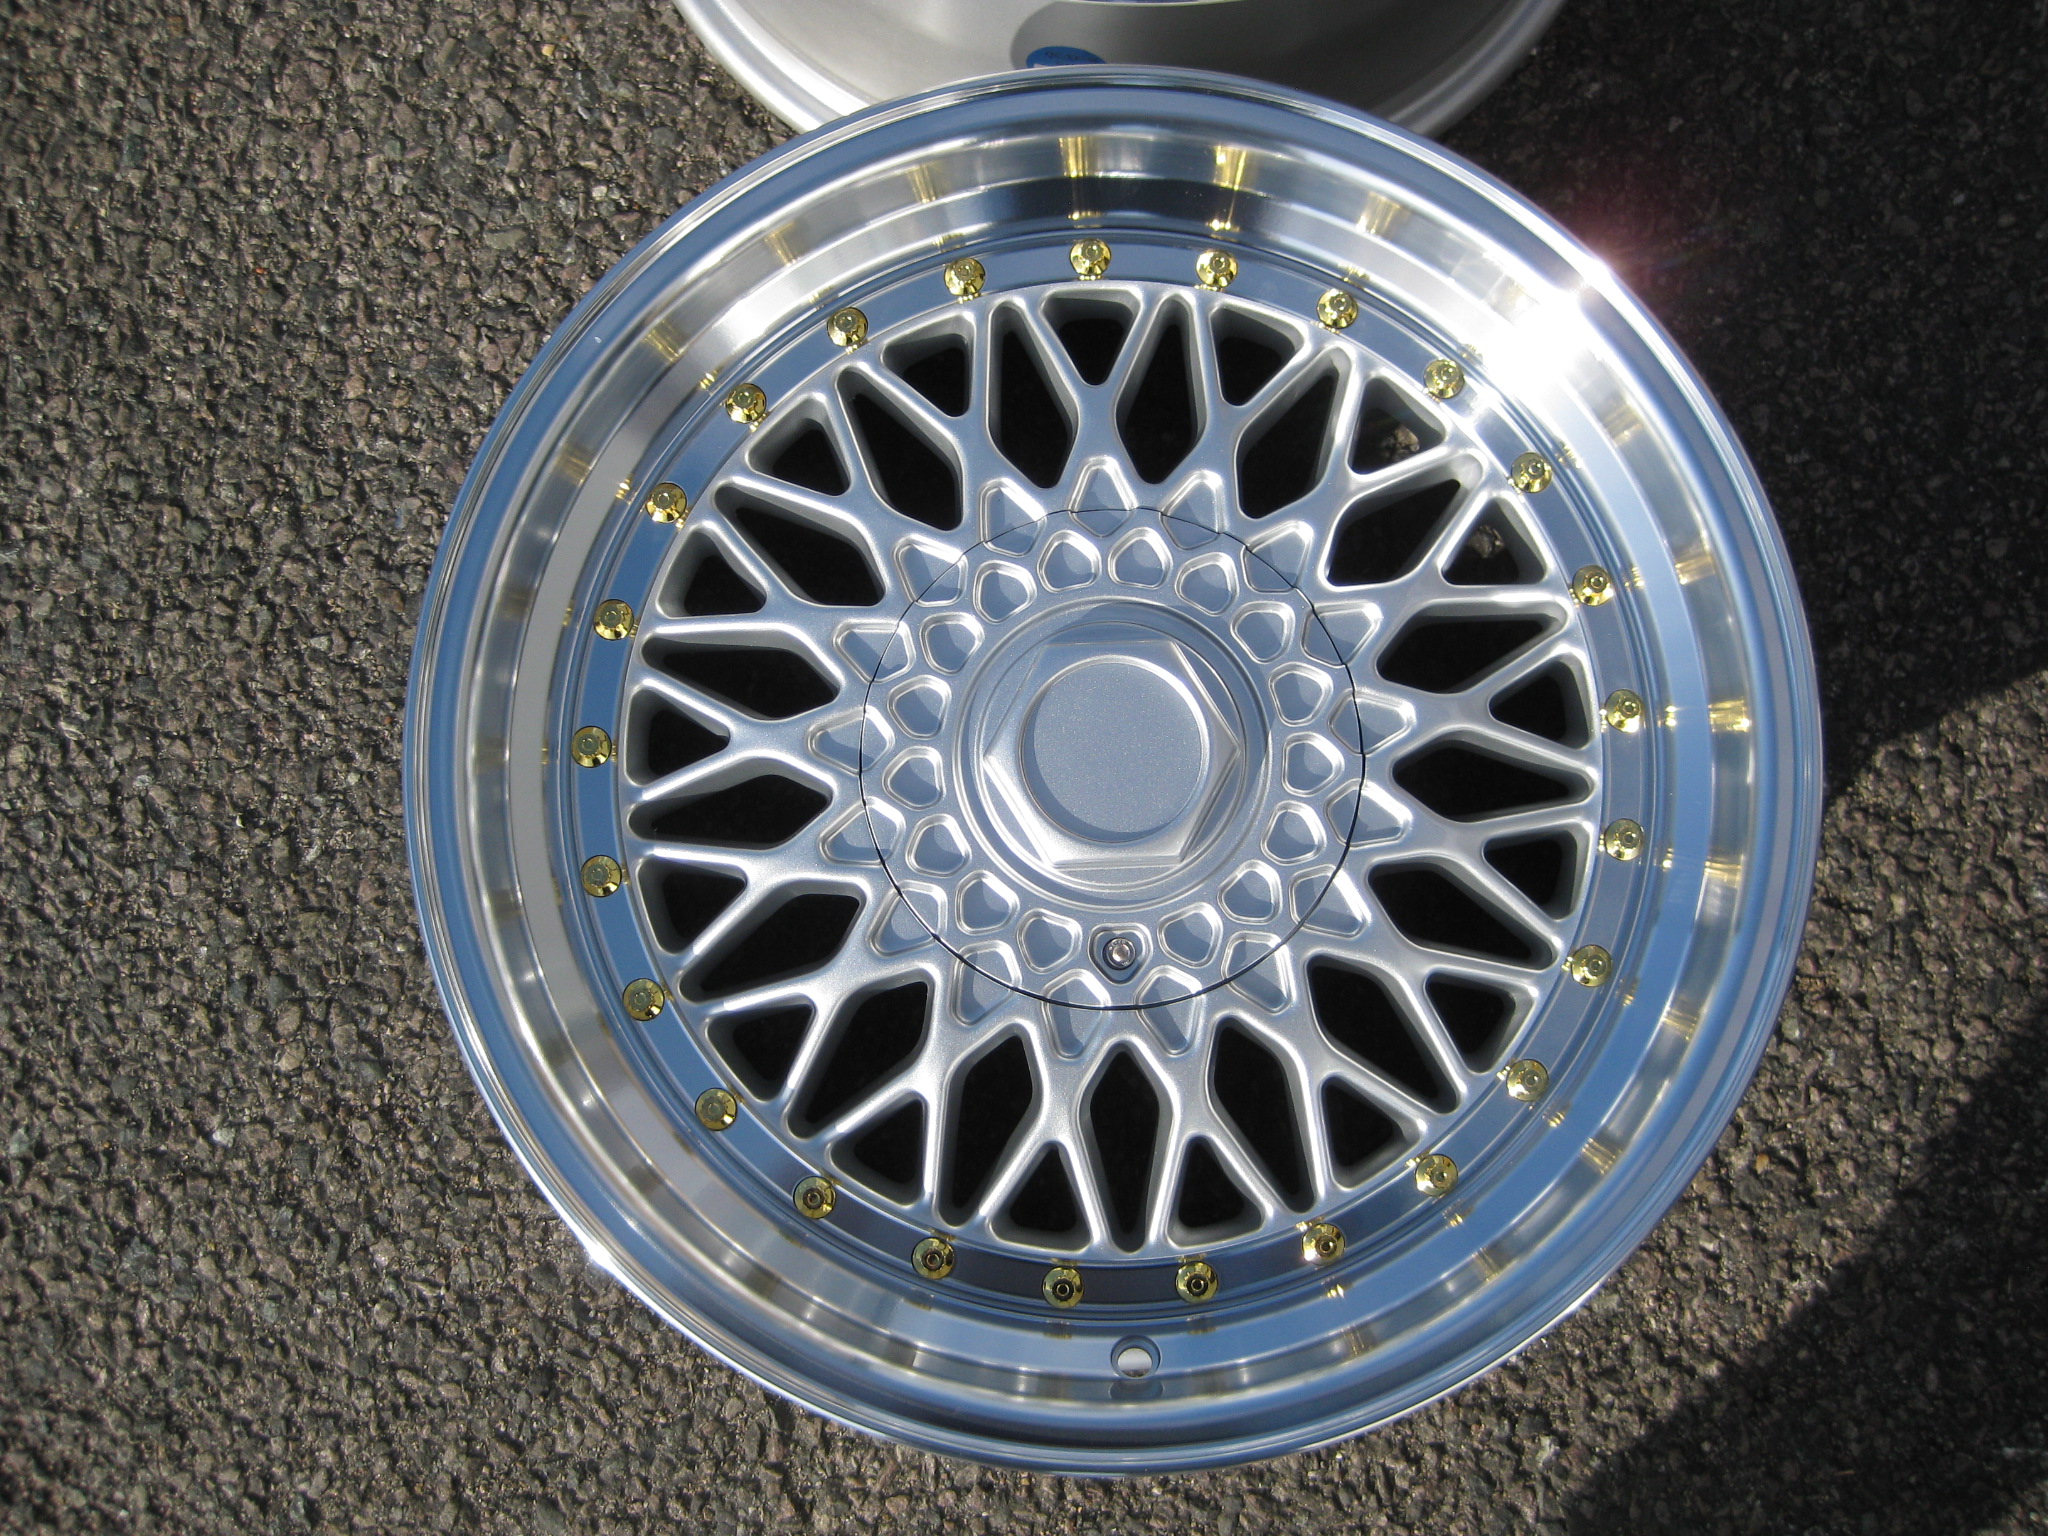 NEW 17" DARE RS ALLOY WHEELS IN SILVER WITH GOLD RIVETS, DEEPER DISH 8.5" REAR. et35/30